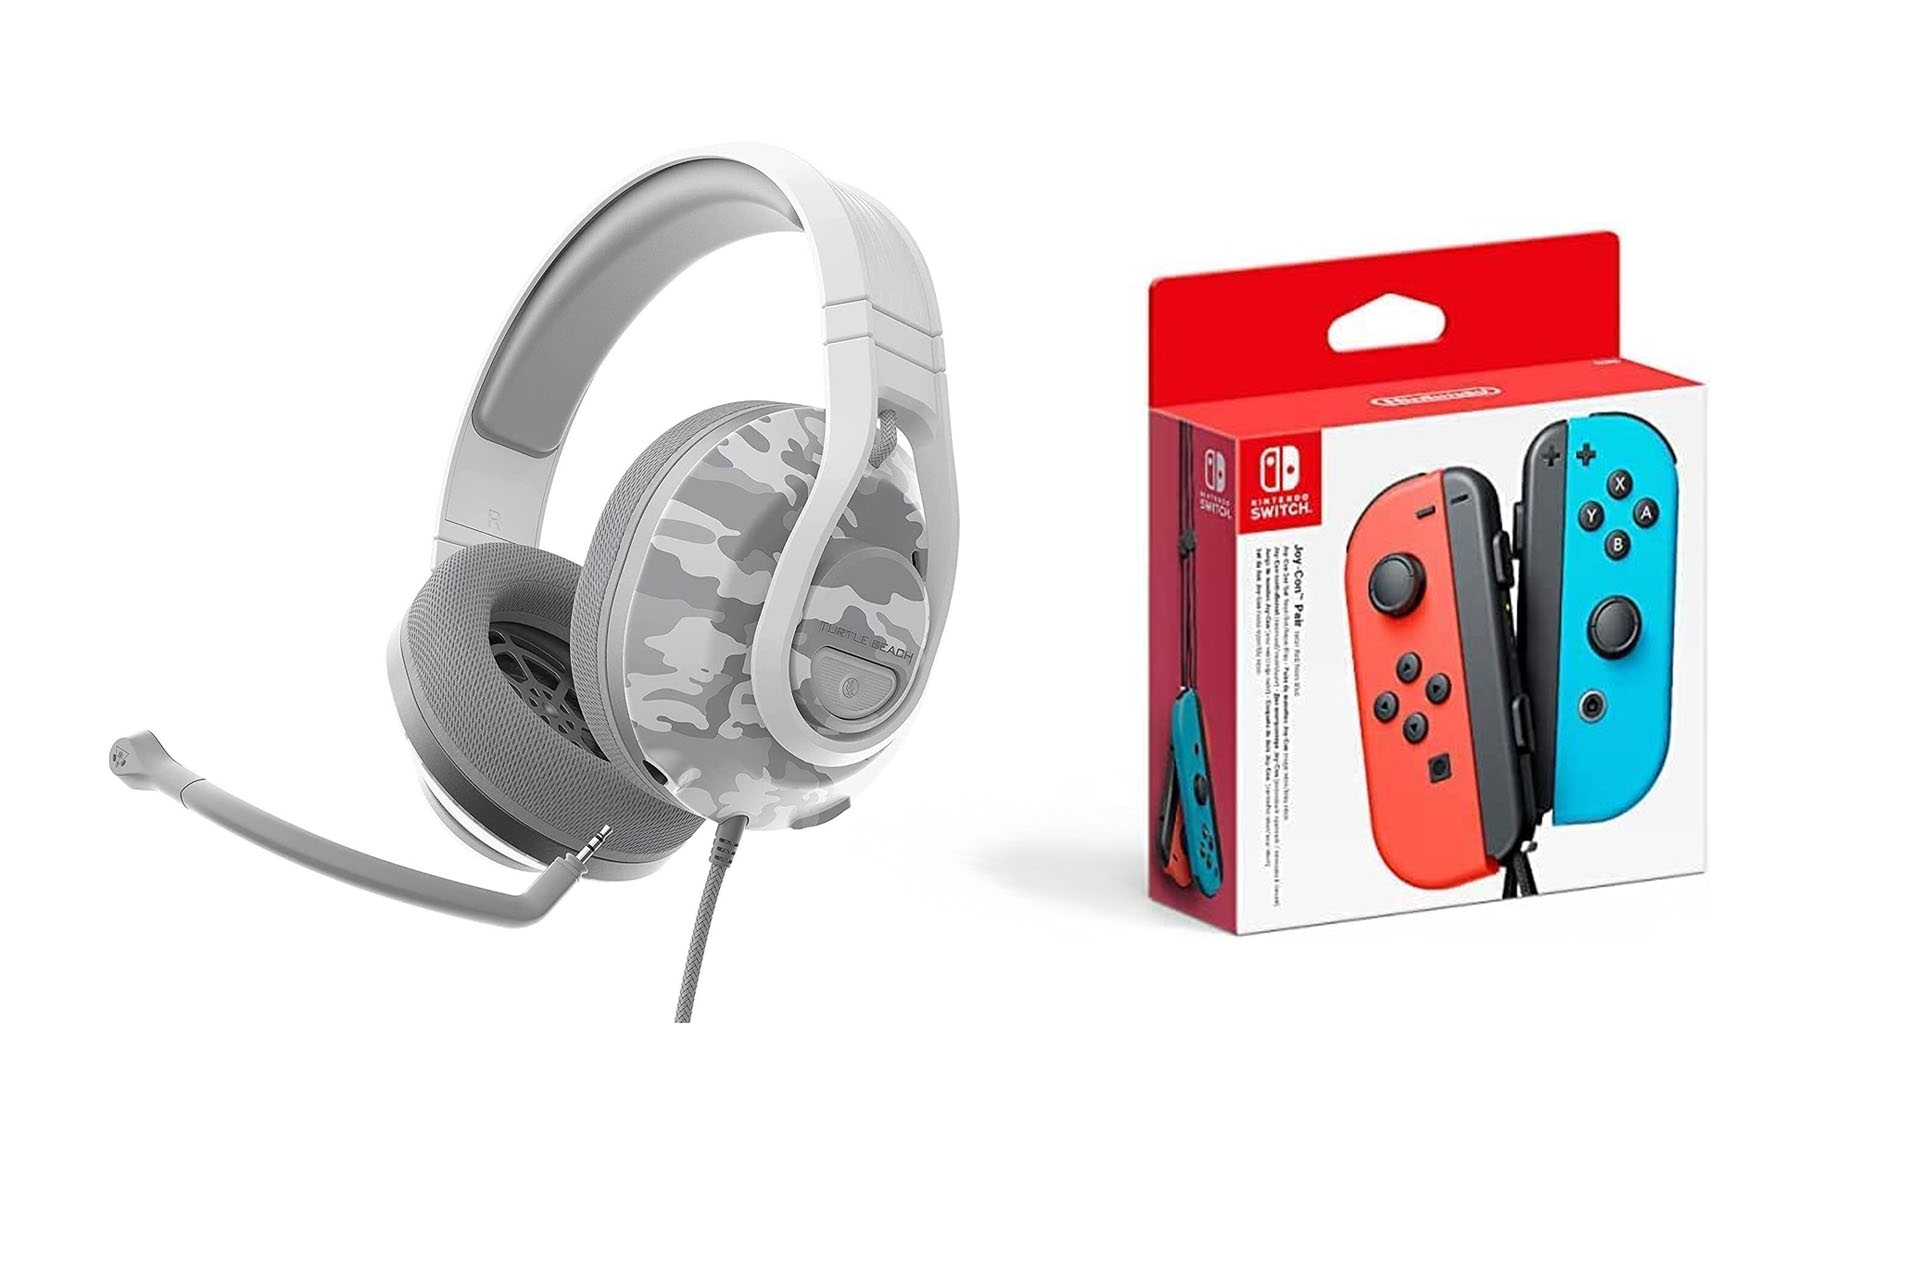 Product shots of both the Nintendo Joy-Con neon pair and the Turtle Beach Recon 500 headset